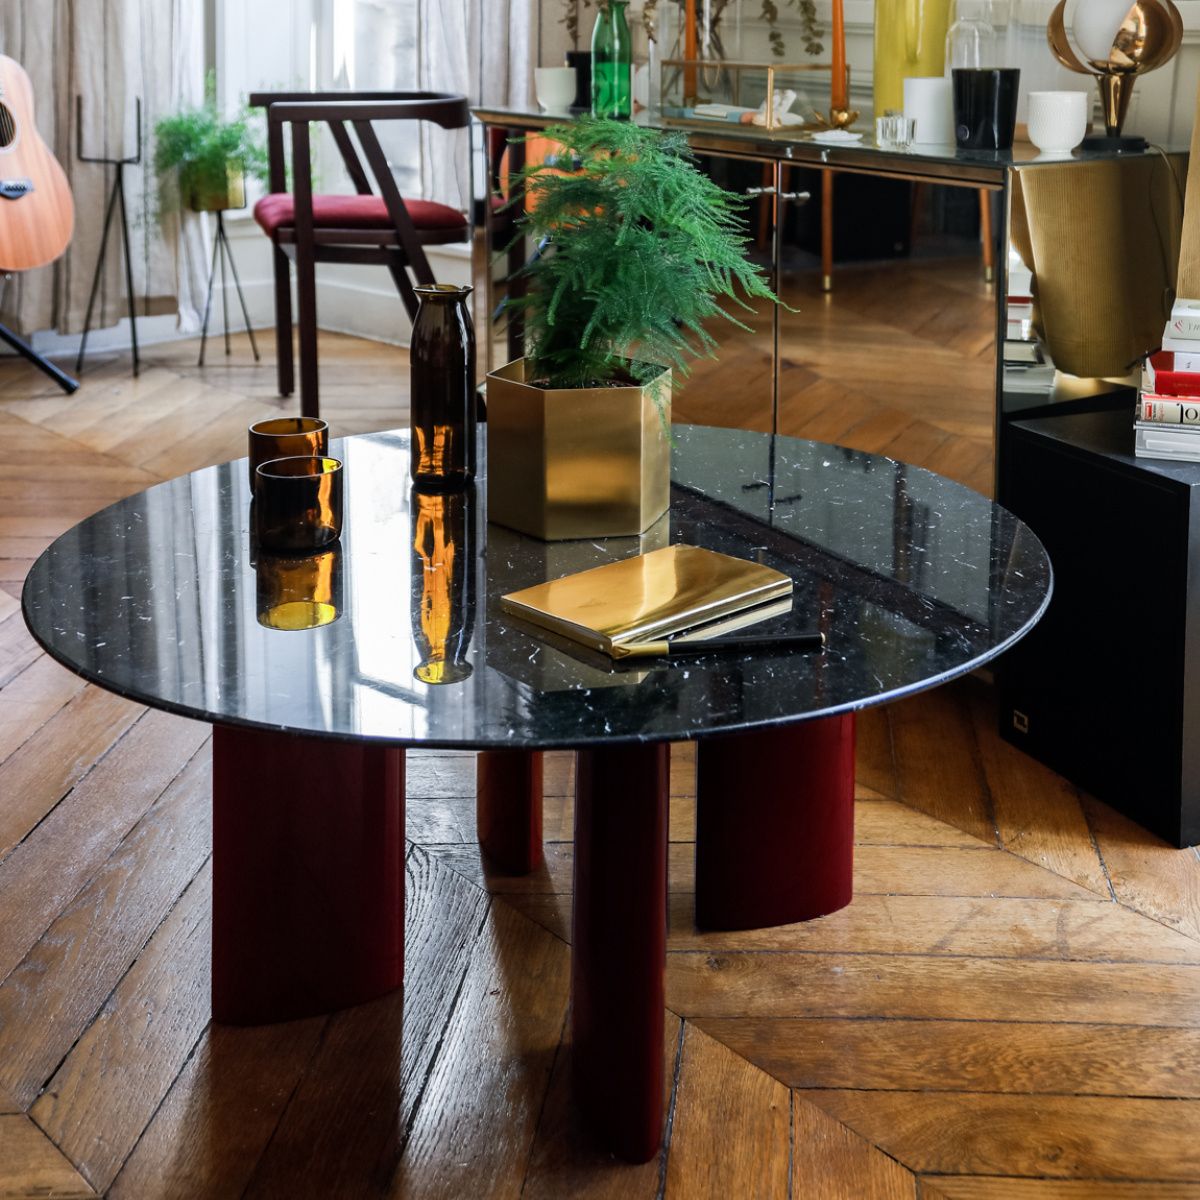 Full Black Round Coffee Tables Pertaining To Well Known Carlotta Round Coffee Table, Black Marble Top And Burgundy Legs (View 6 of 10)